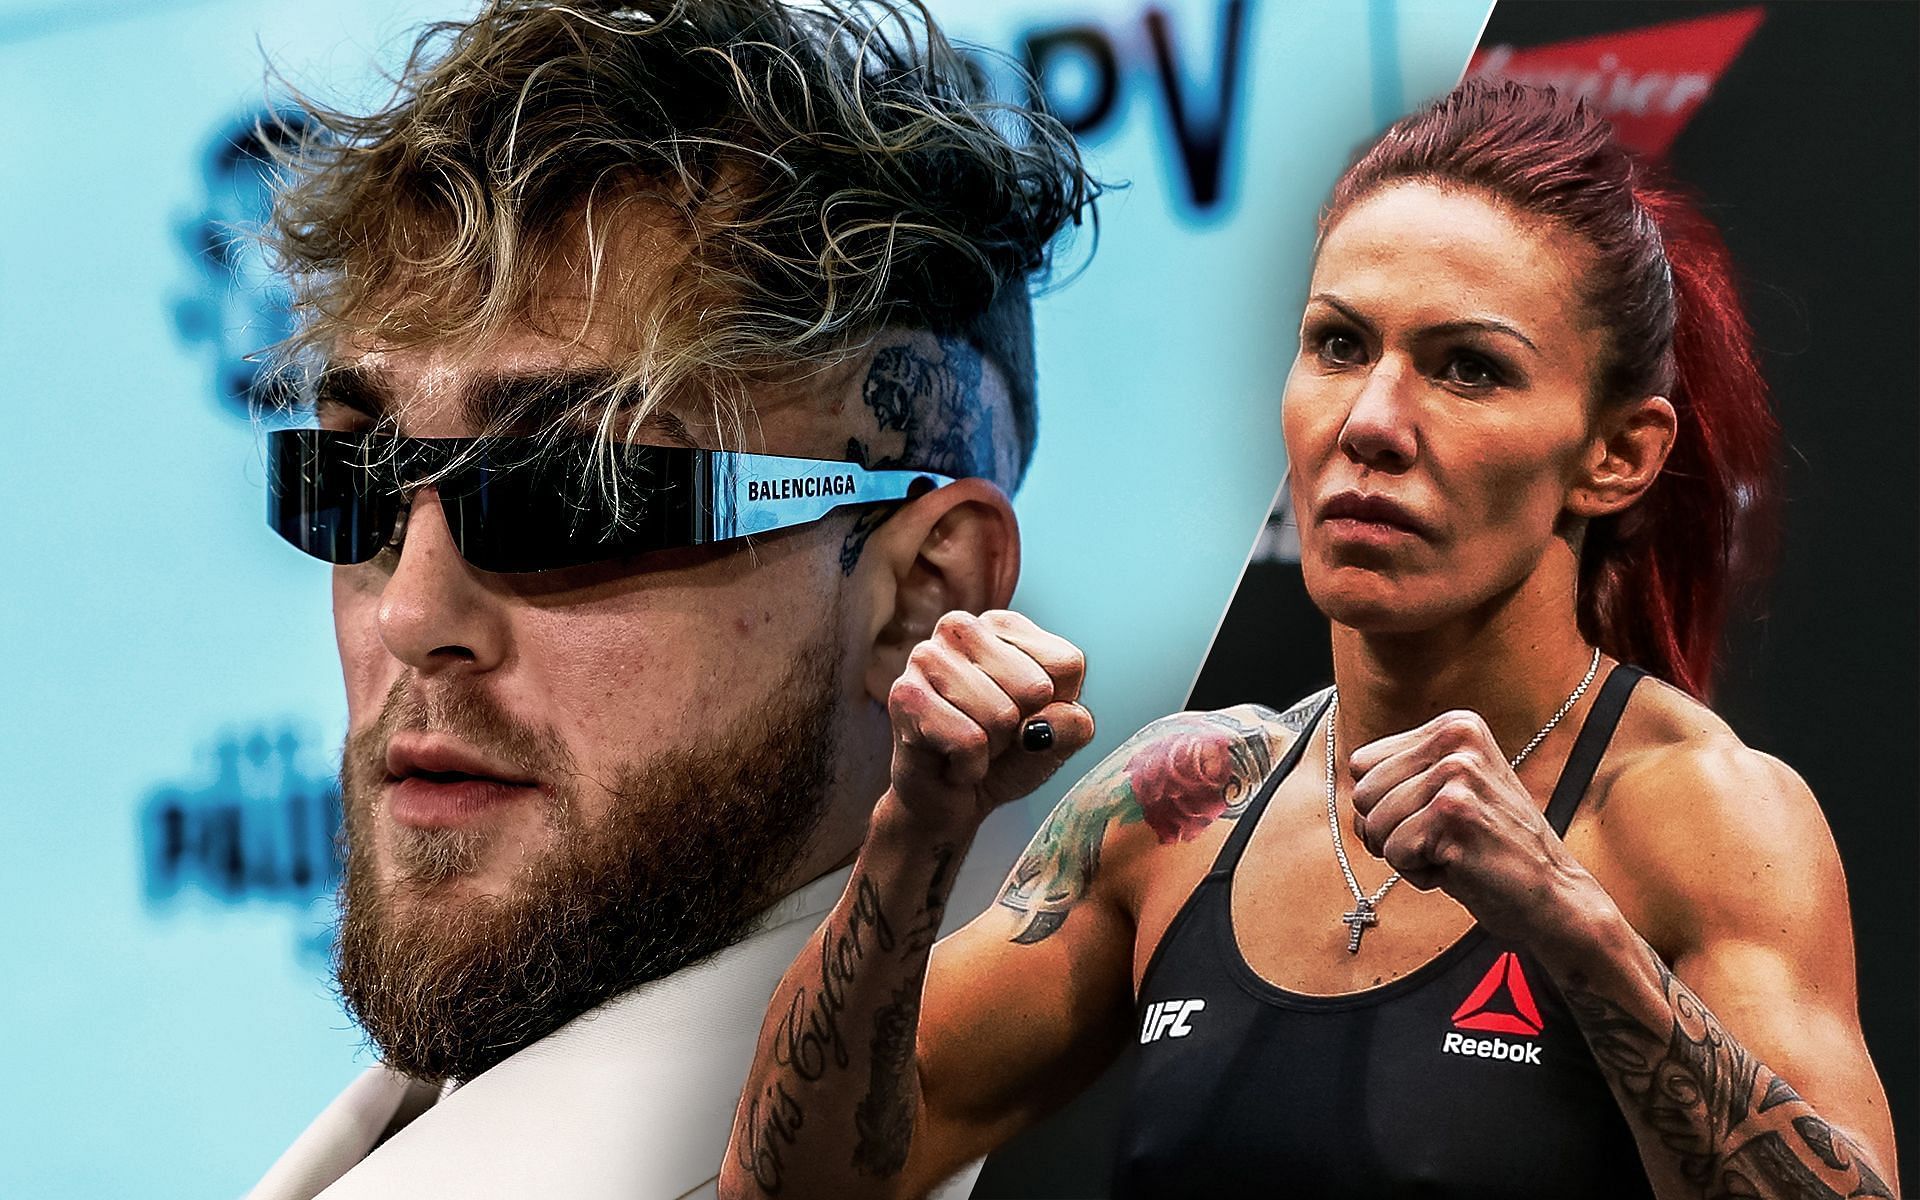 Jake Paul (left) and Cris Cyborg (right)